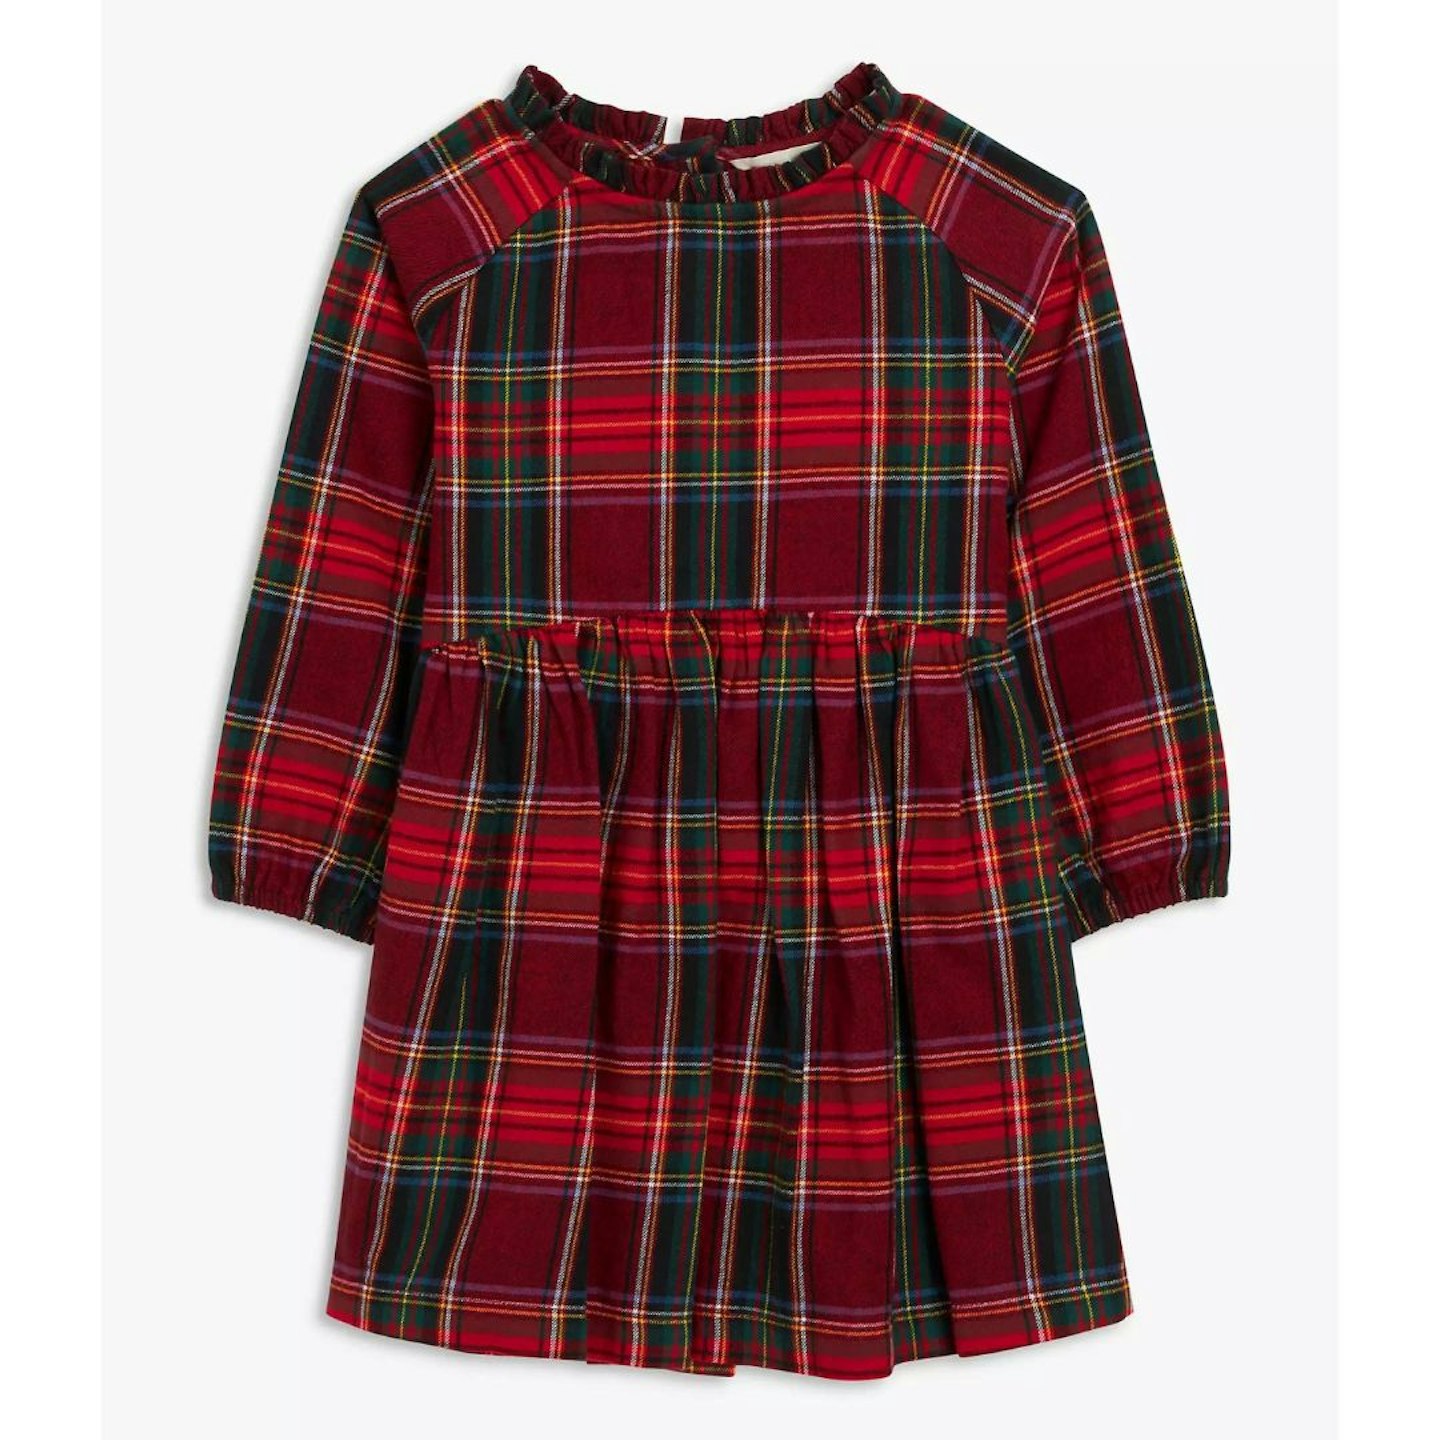 Best Christmas Day Outfits For Kids: Baby Brushed Cotton Check Dress